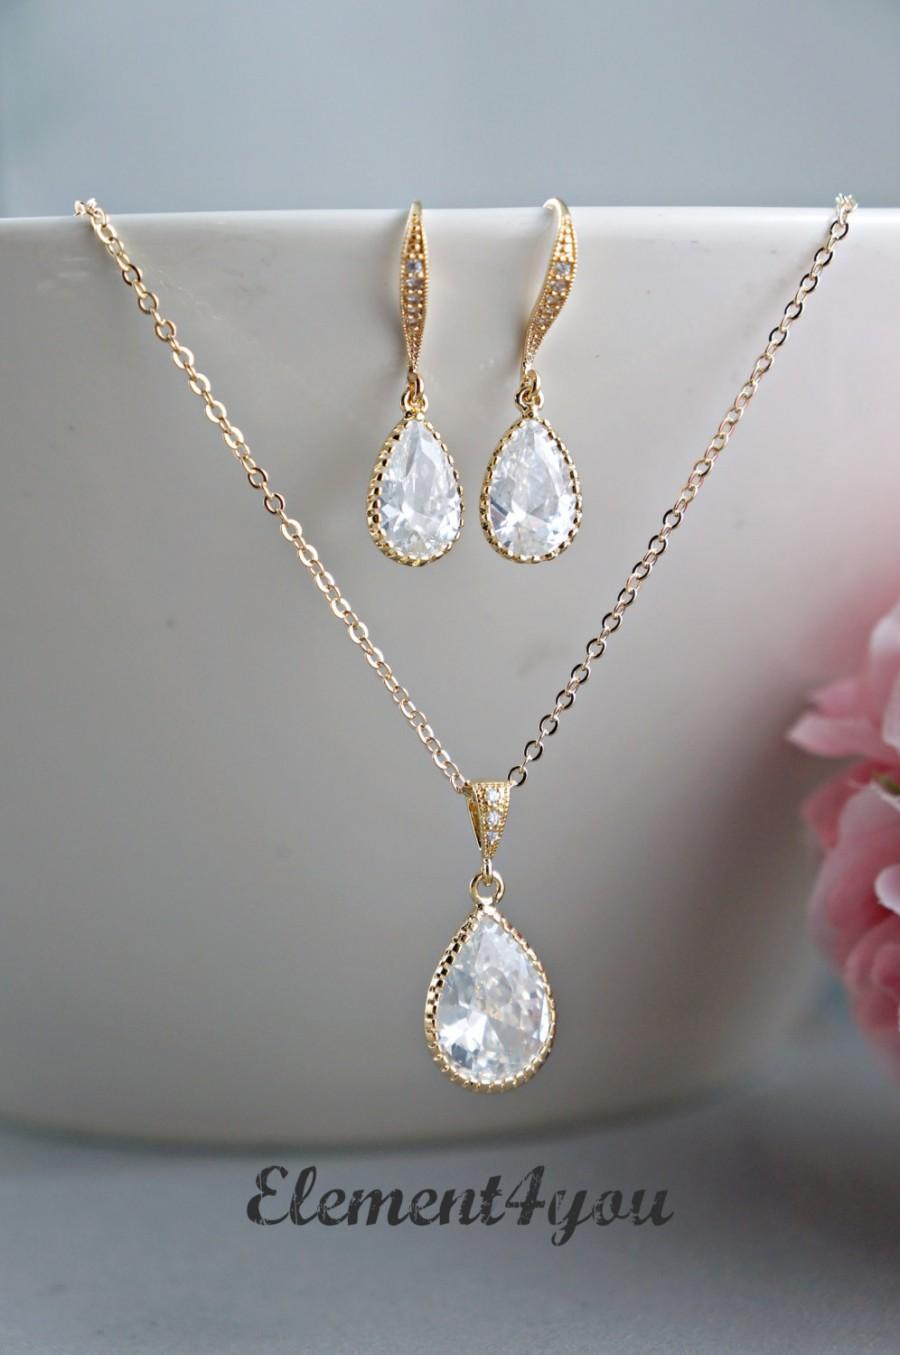 Wedding - Wedding bridal jewelry set, Bridesmaid necklace earrings, Pear drop Cubic Zirconia pendant CZ Earrings Bridal party gift Delicate goldchain